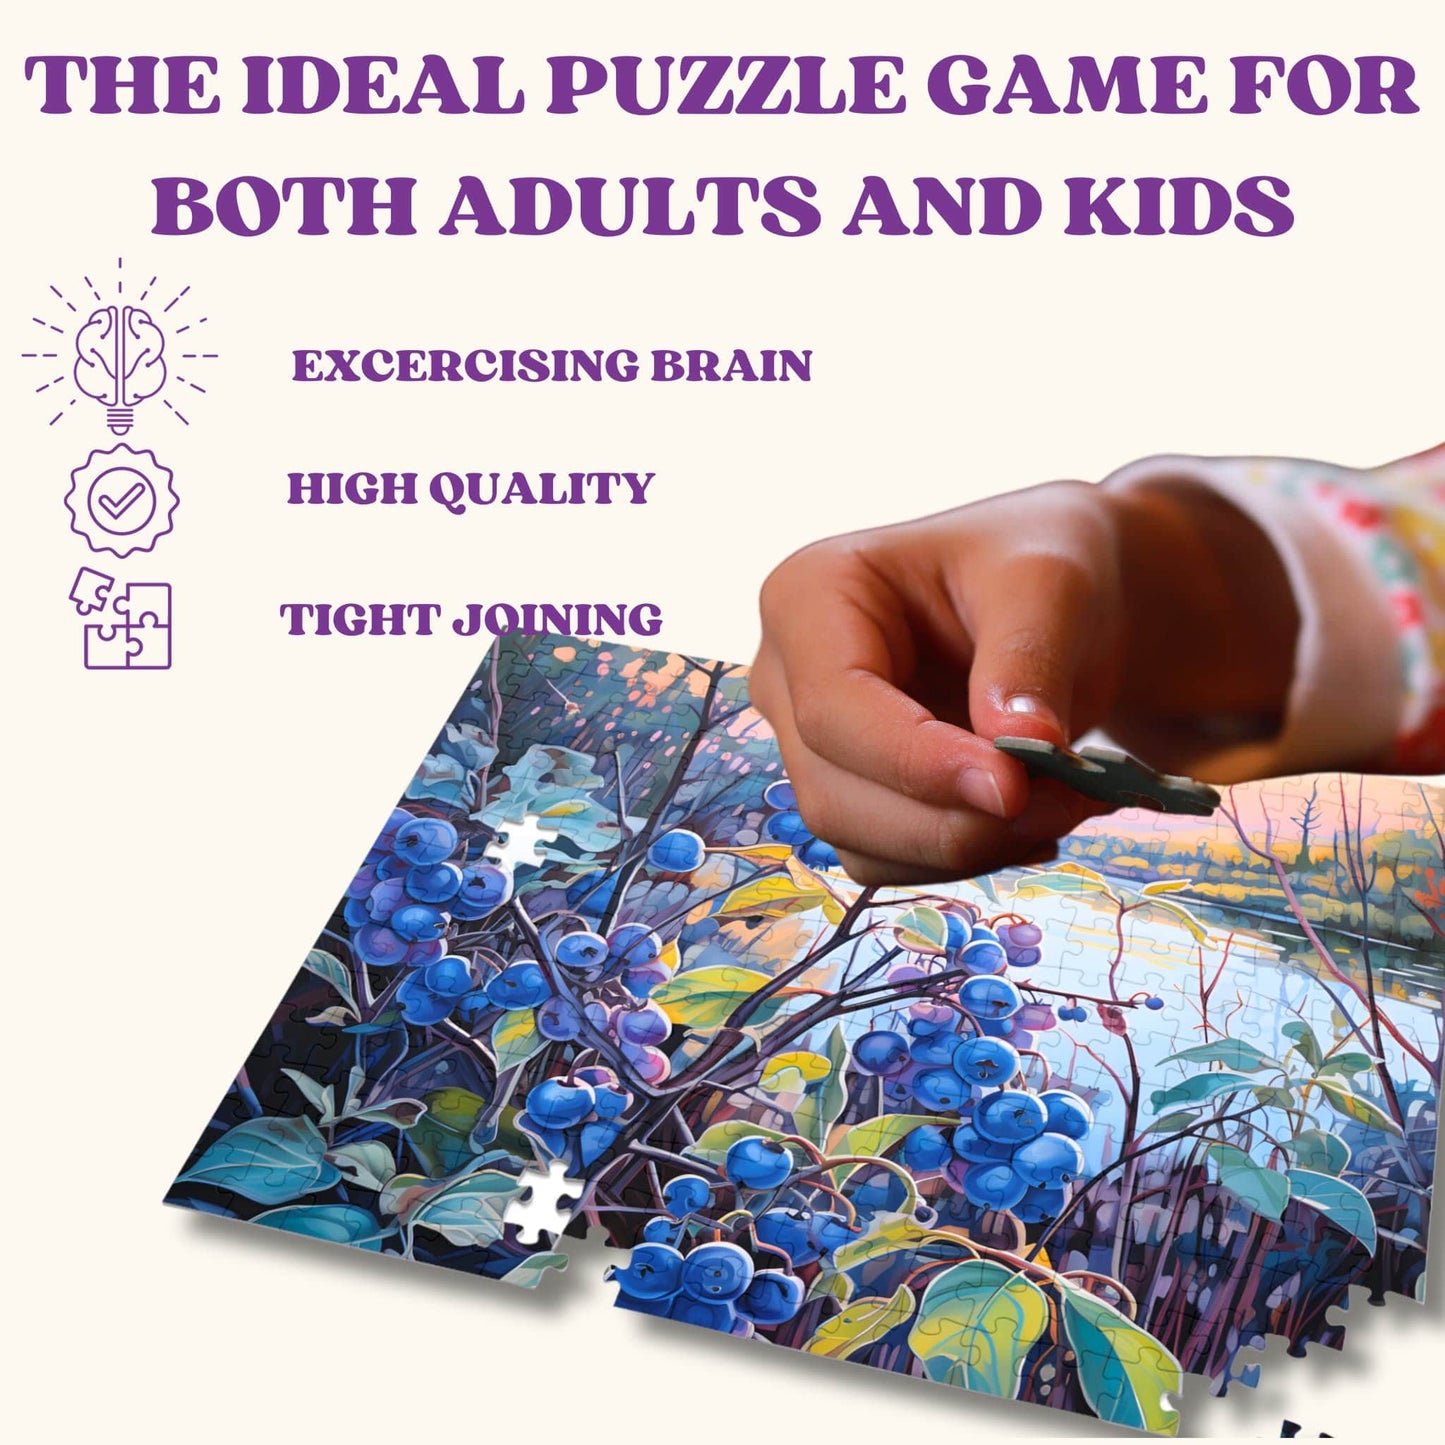 Hand placing pieces of the 1000-piece Impressionist Blueberry Bush puzzle, with puzzle features displayed on the left side